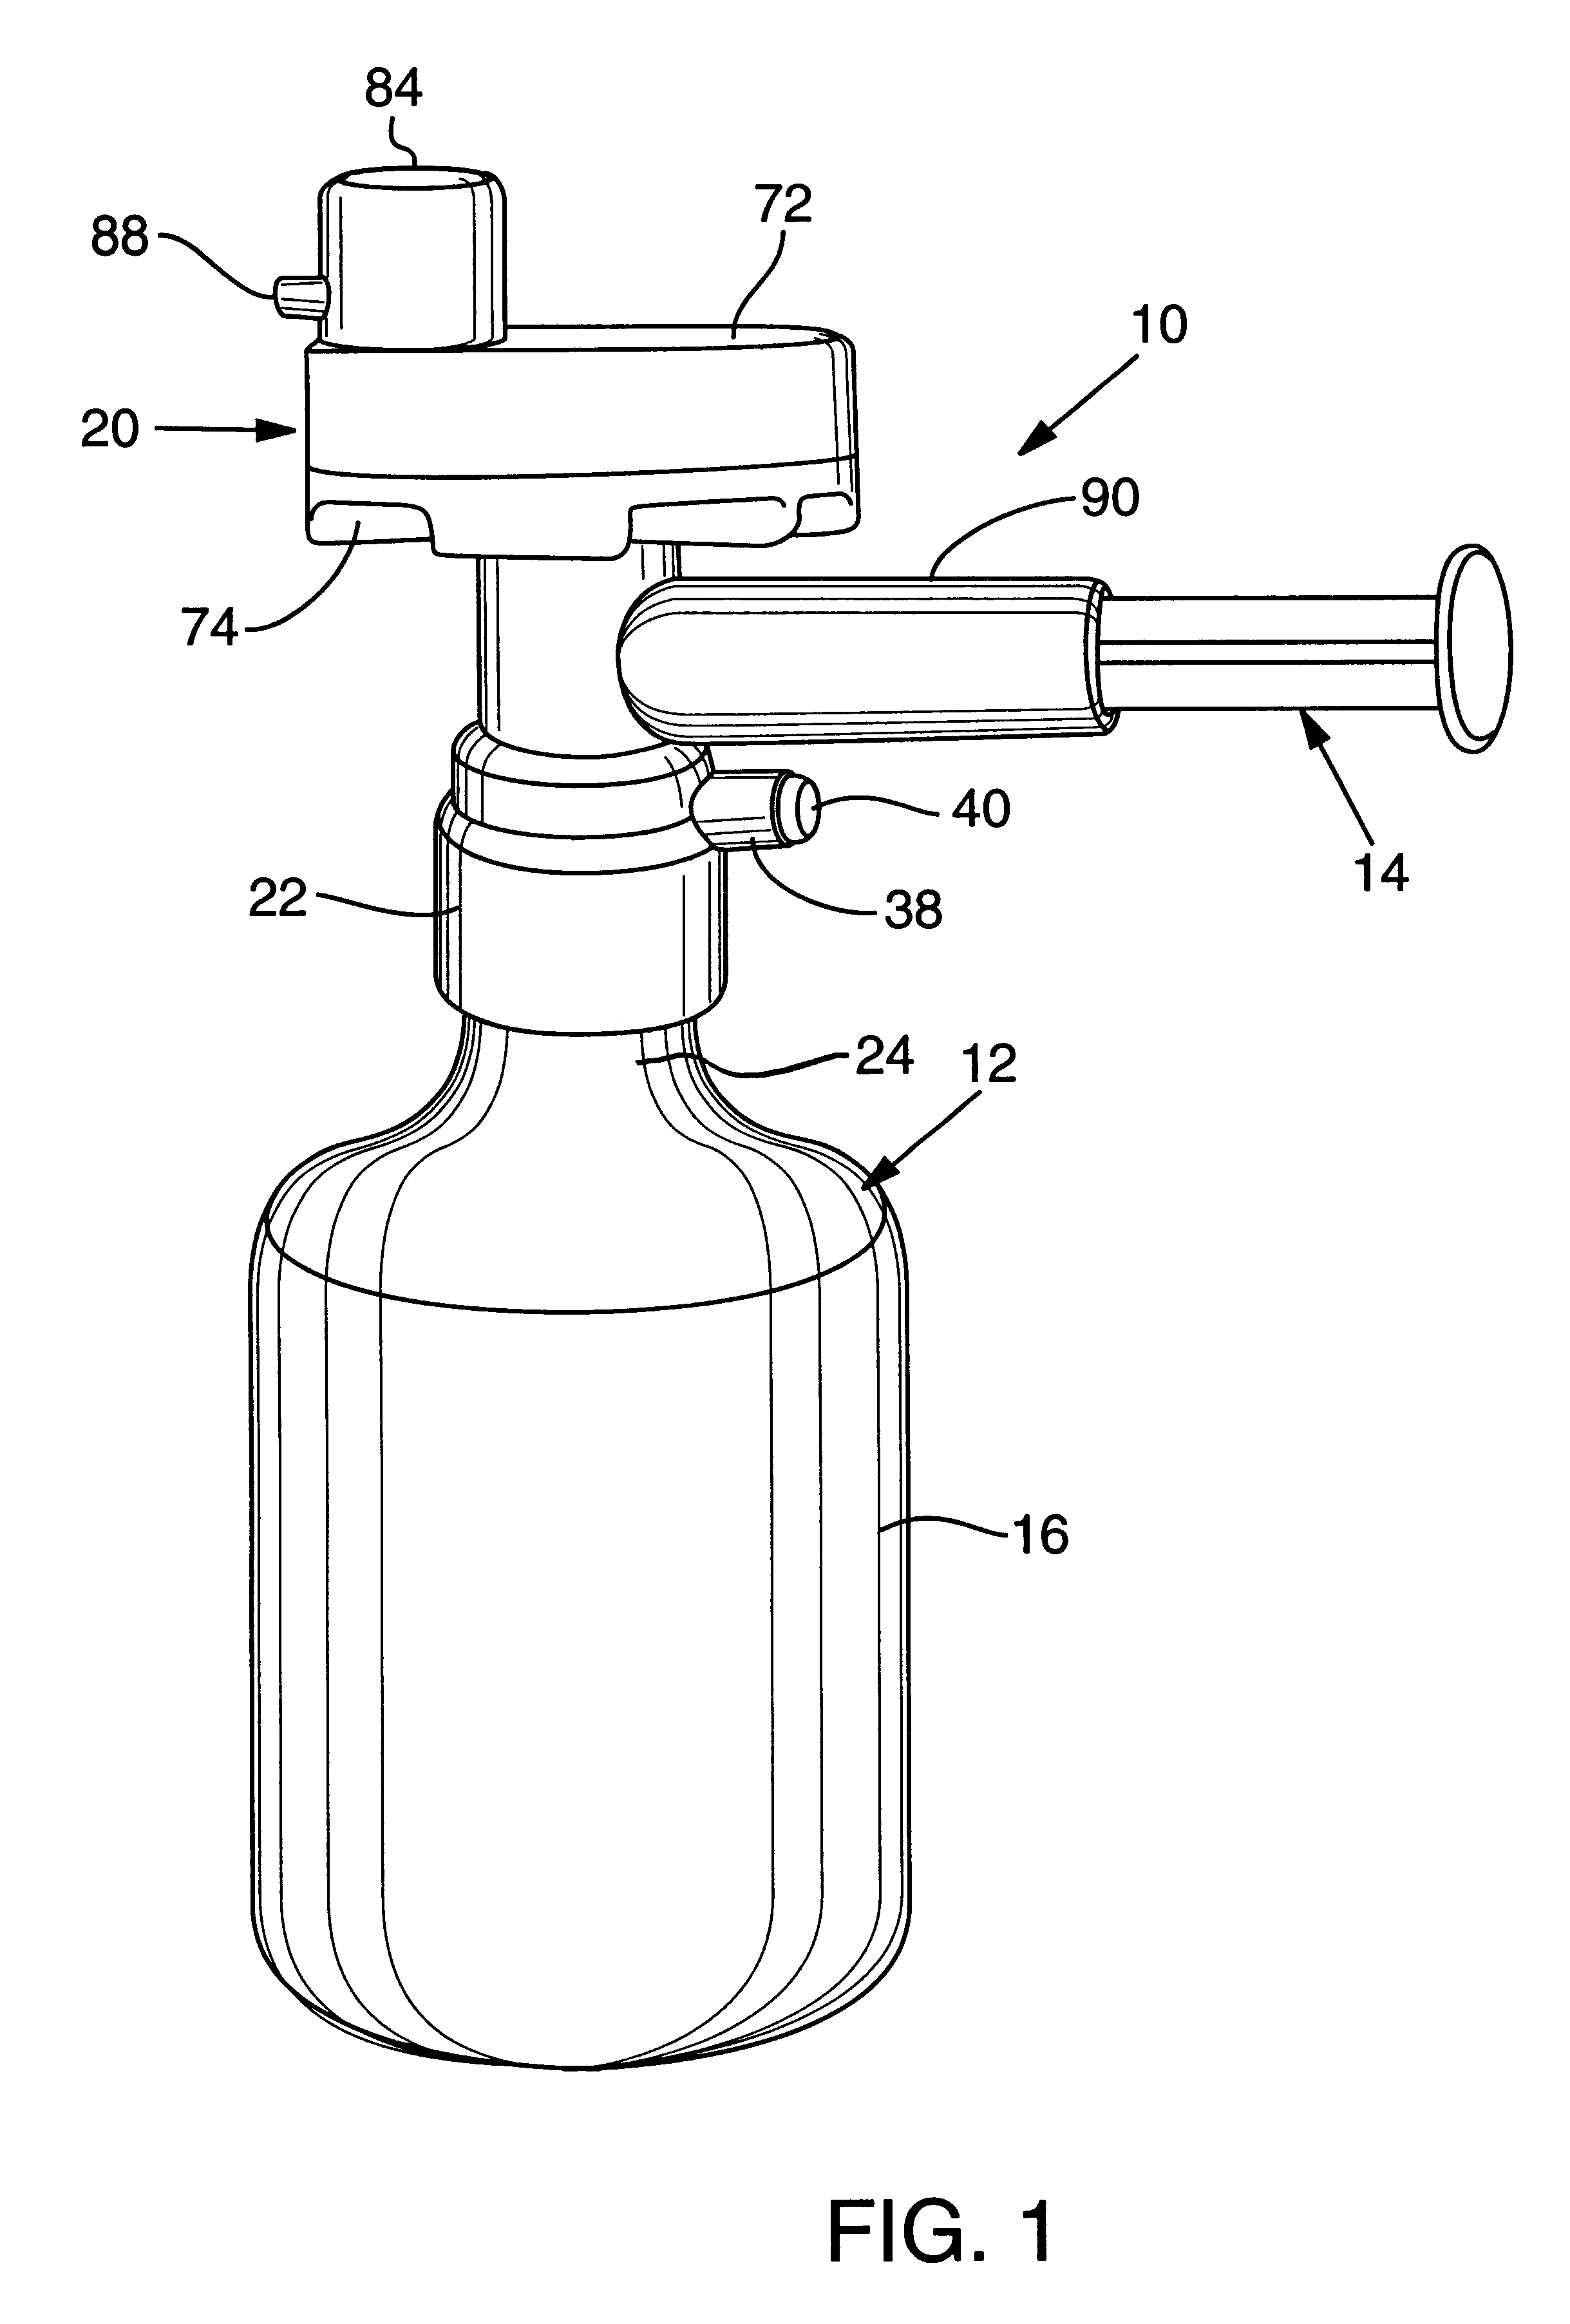 Method and apparatus for removing air locks within manually operated micro-filtration devices